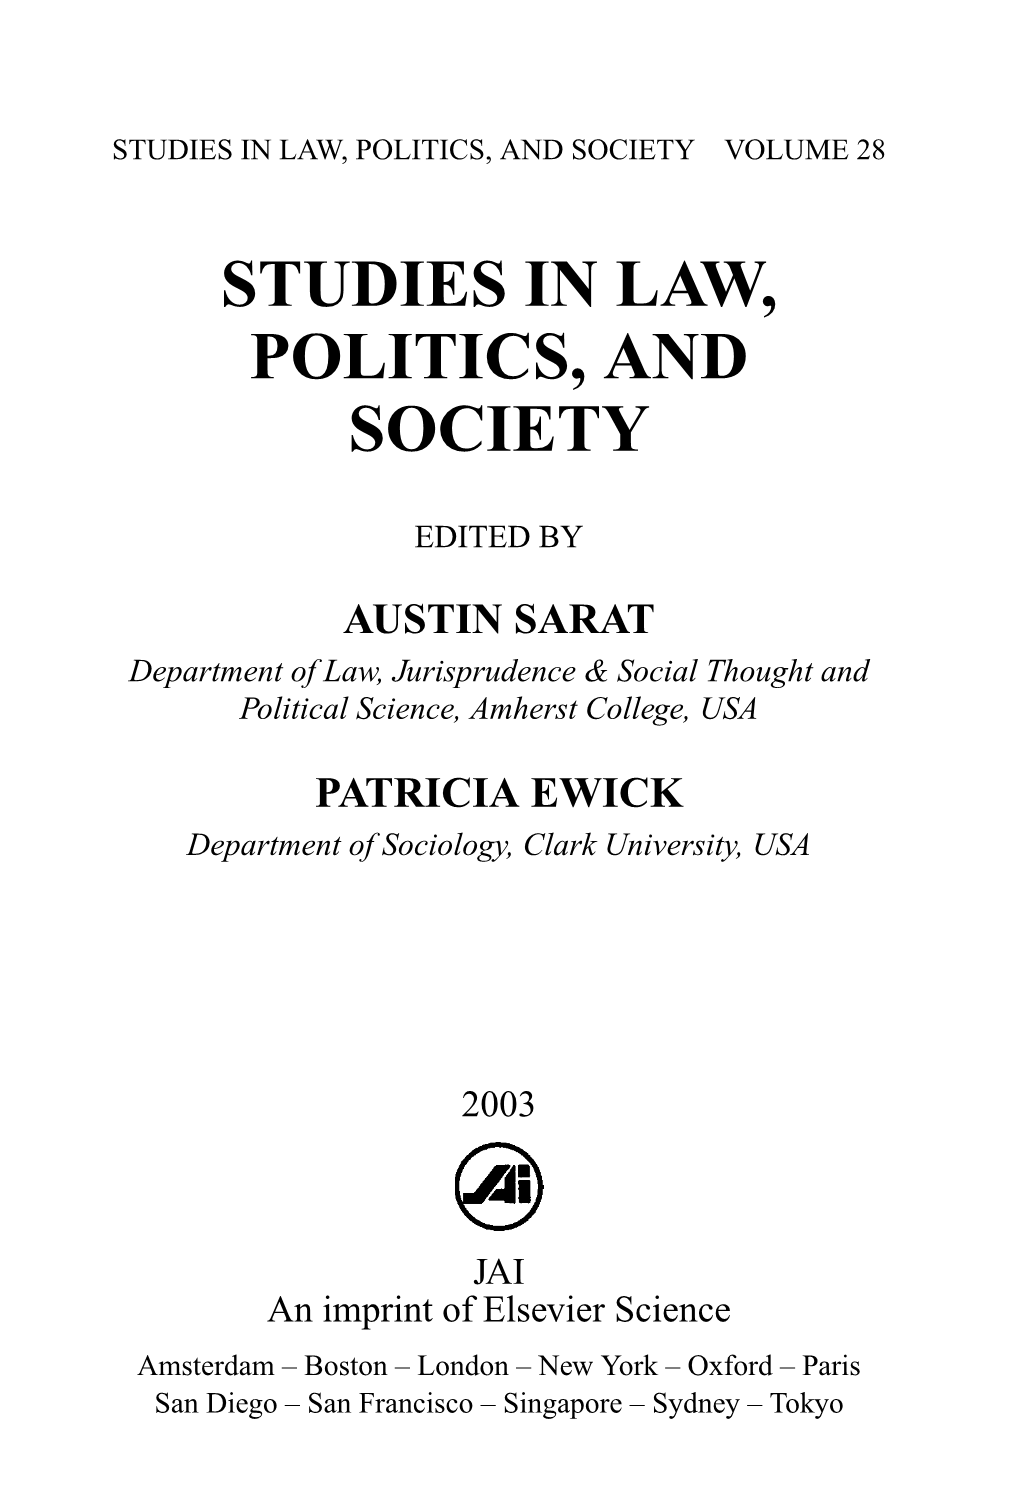 Studies in Law, Politics, and Society Volume 28